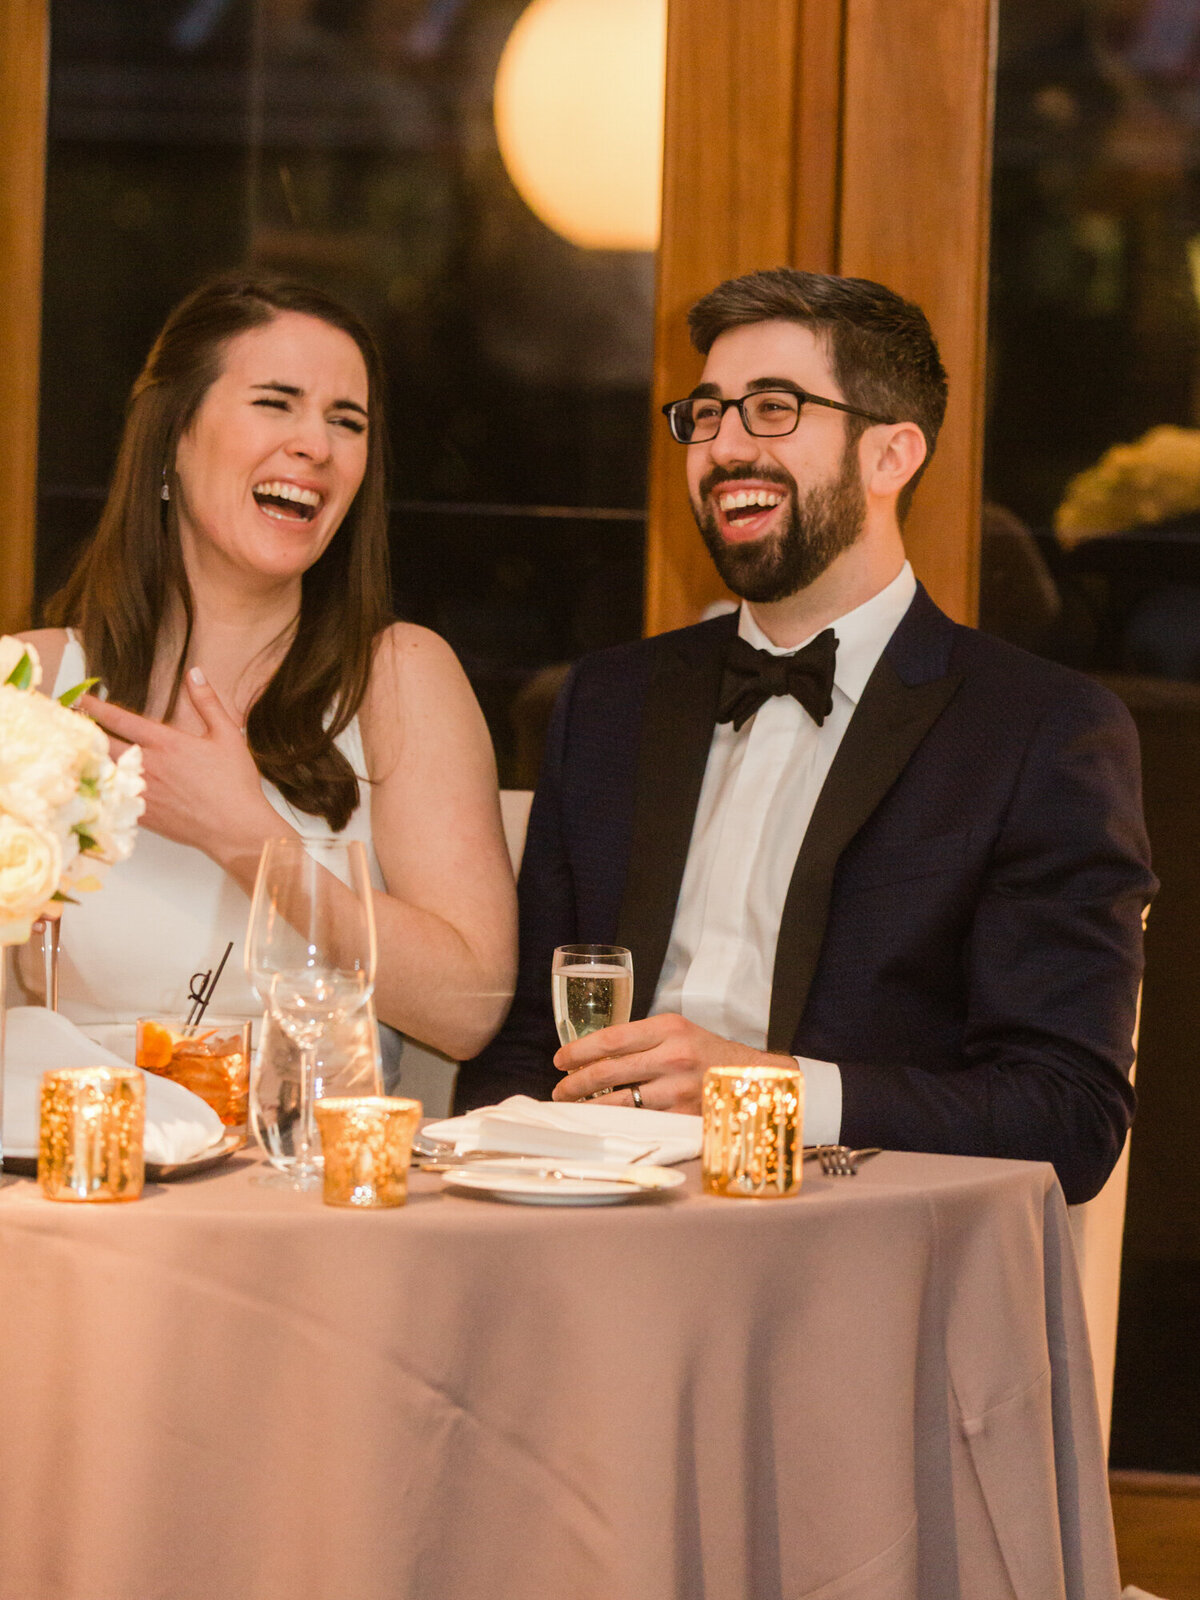 A candid moment during a wedding reception at the Ivy Room in Chicago